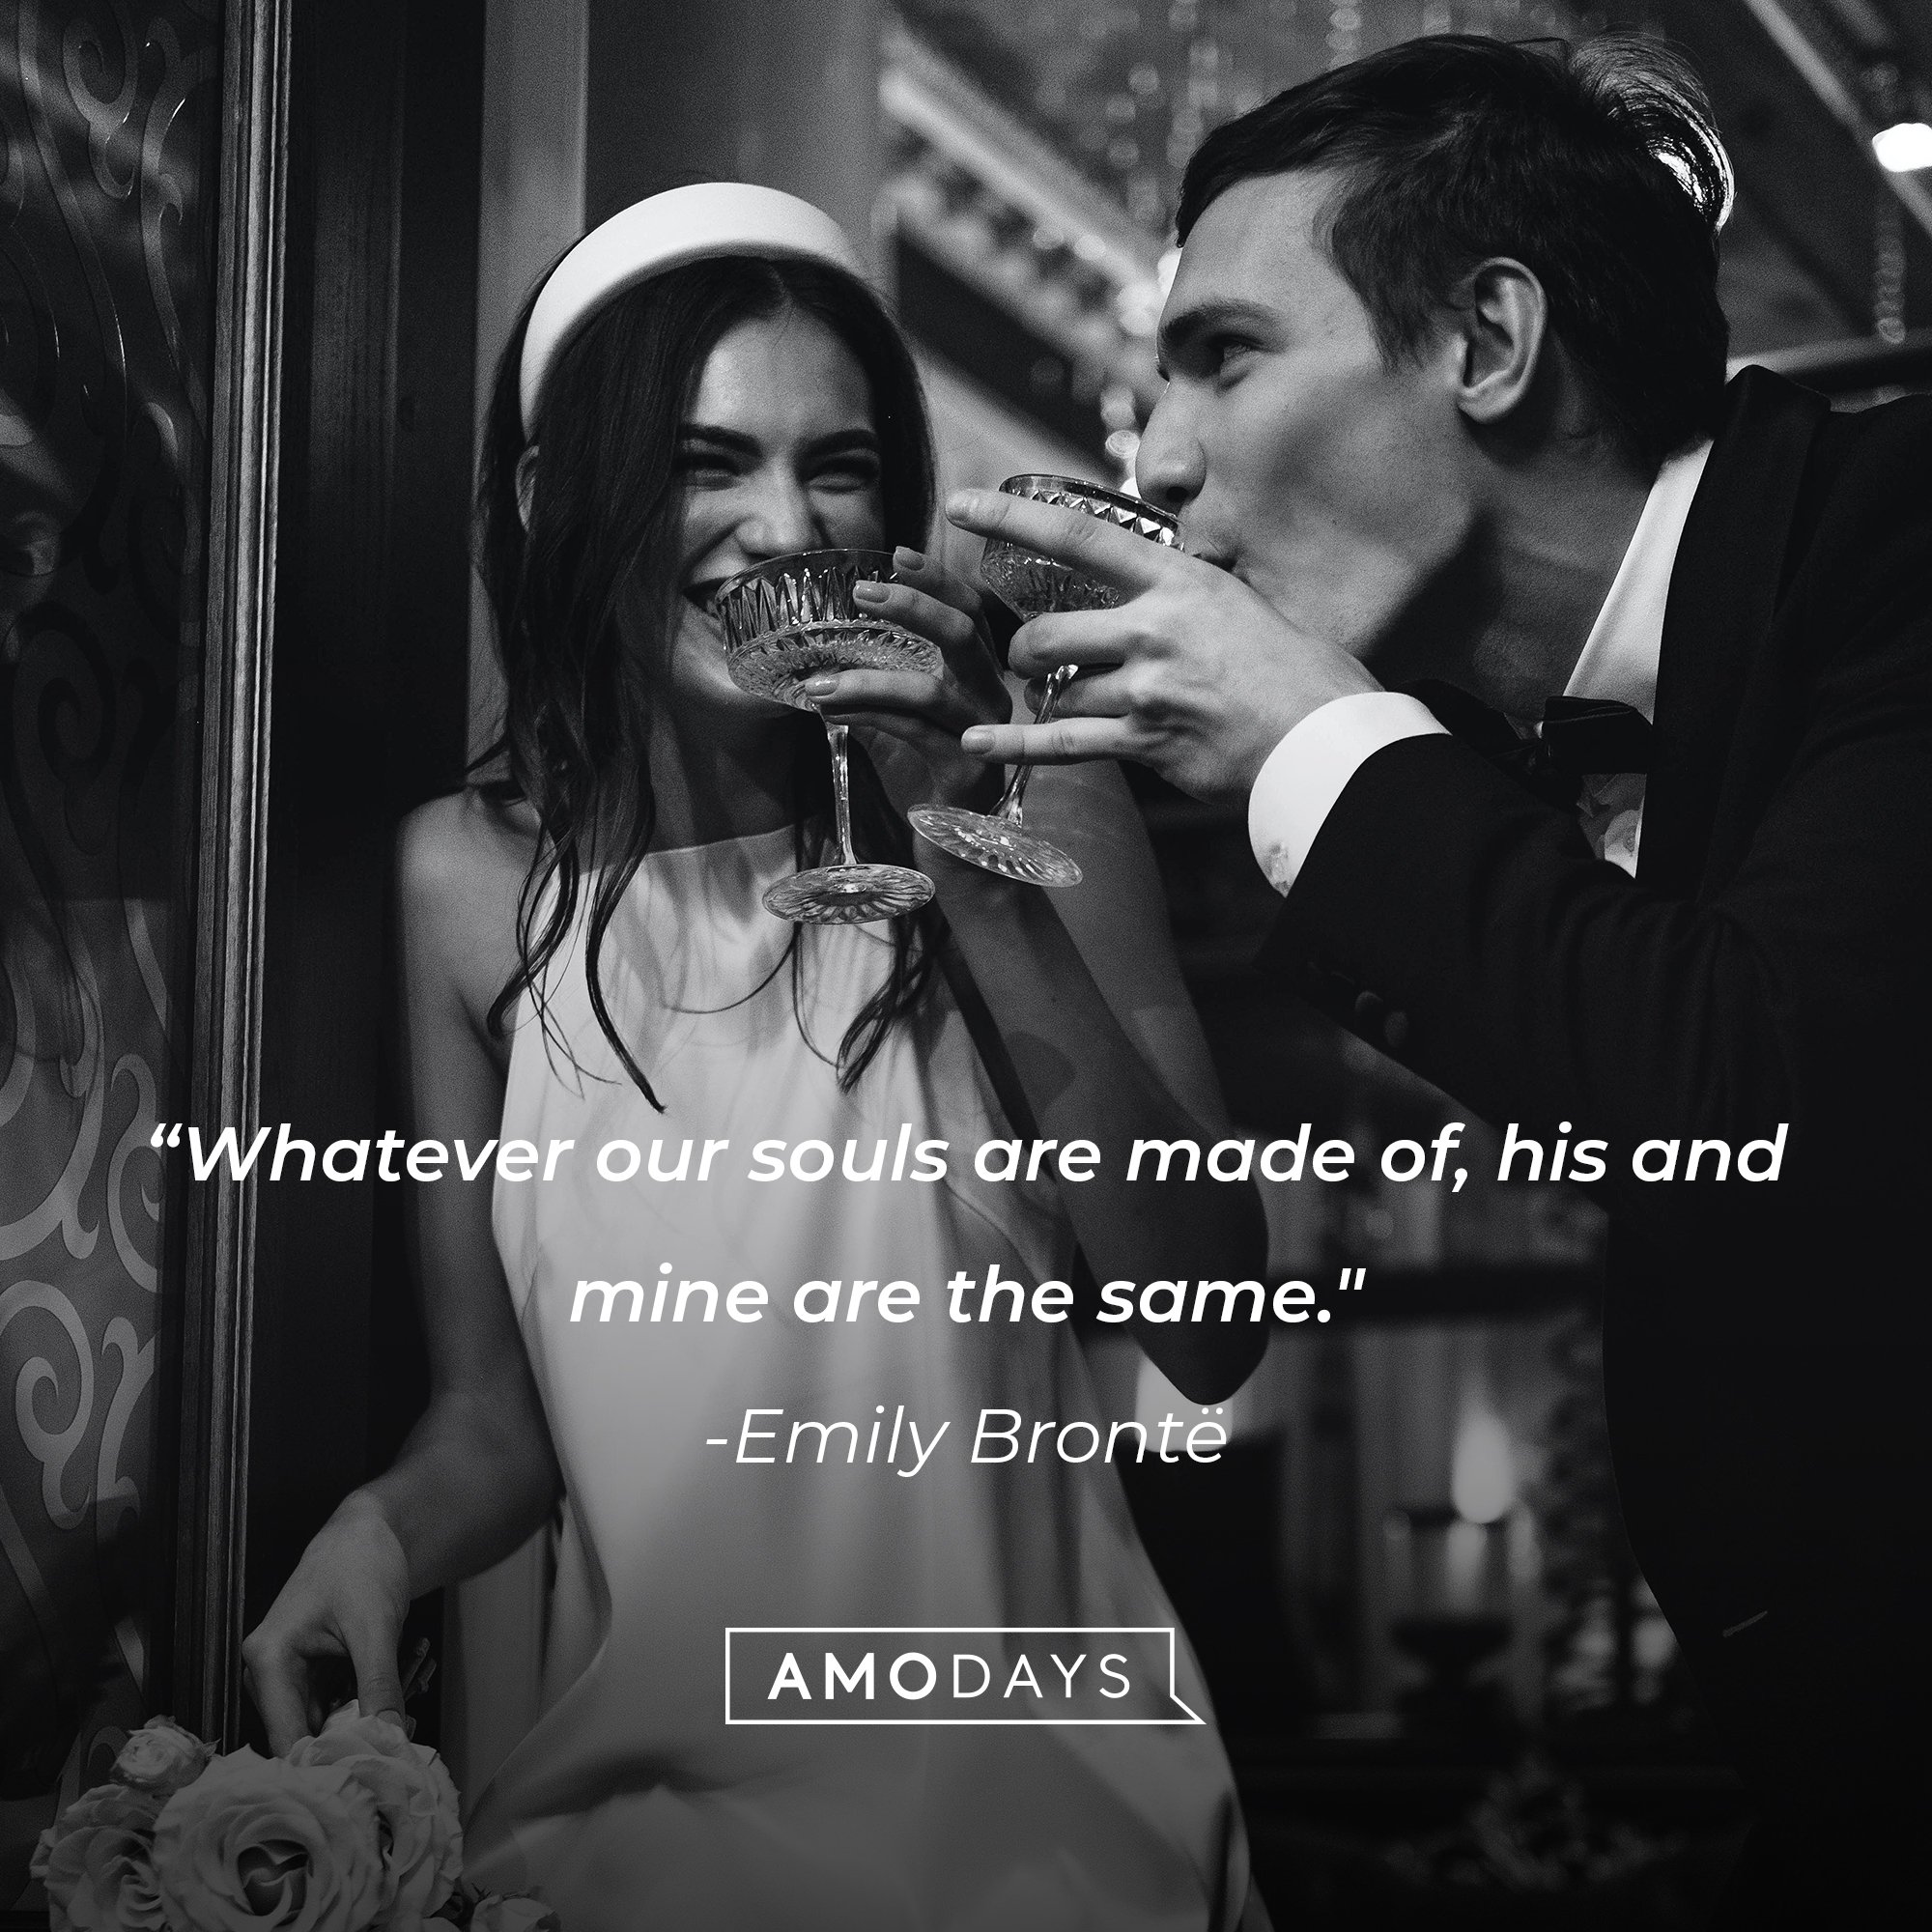 Emily Brontë's quote: "Whatever our souls are made of, his and mine are the same." | Image: AmoDays